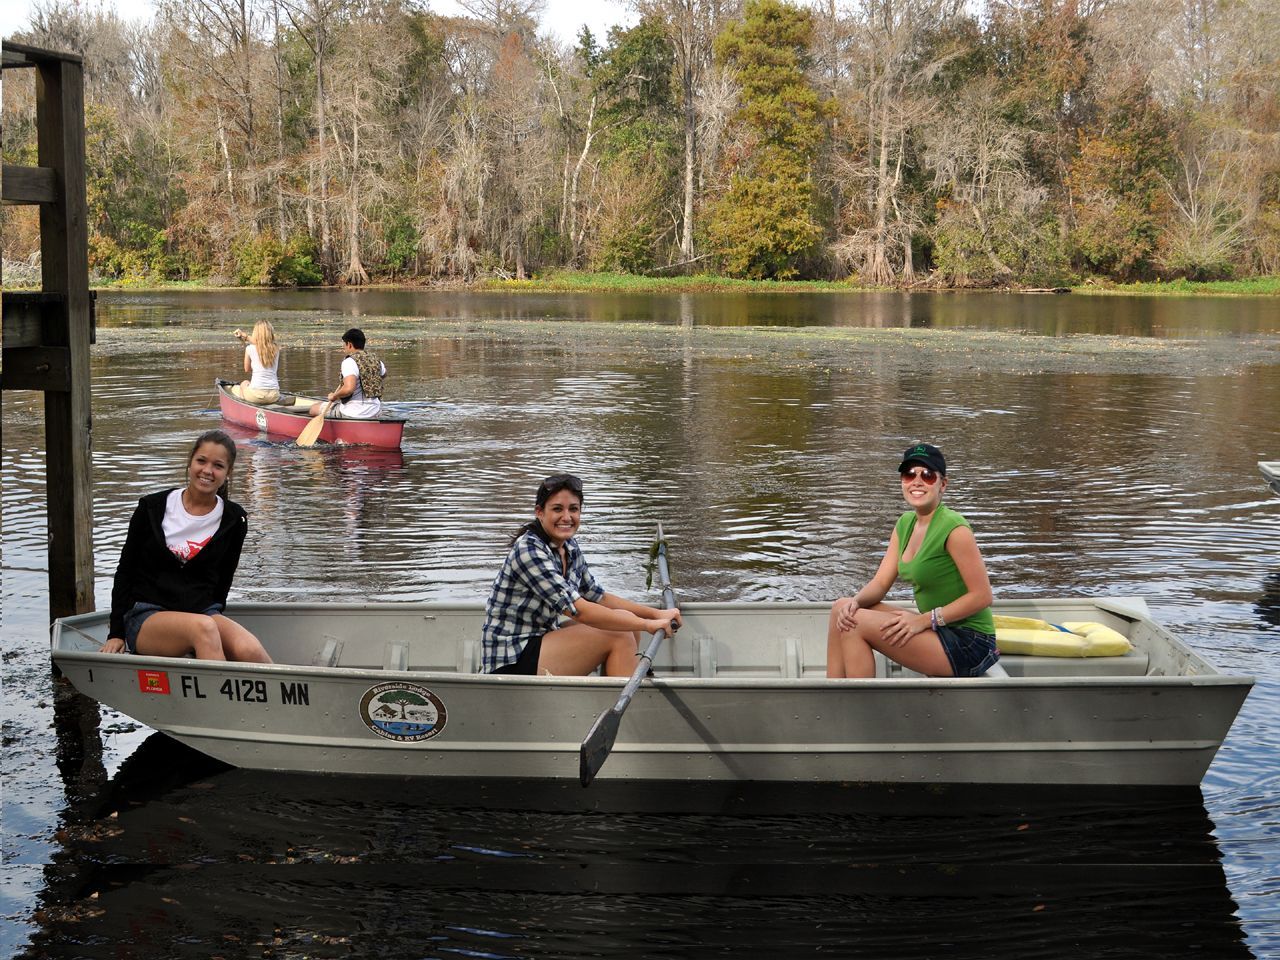 three people are sitting in a boat with the license plate fl 4775